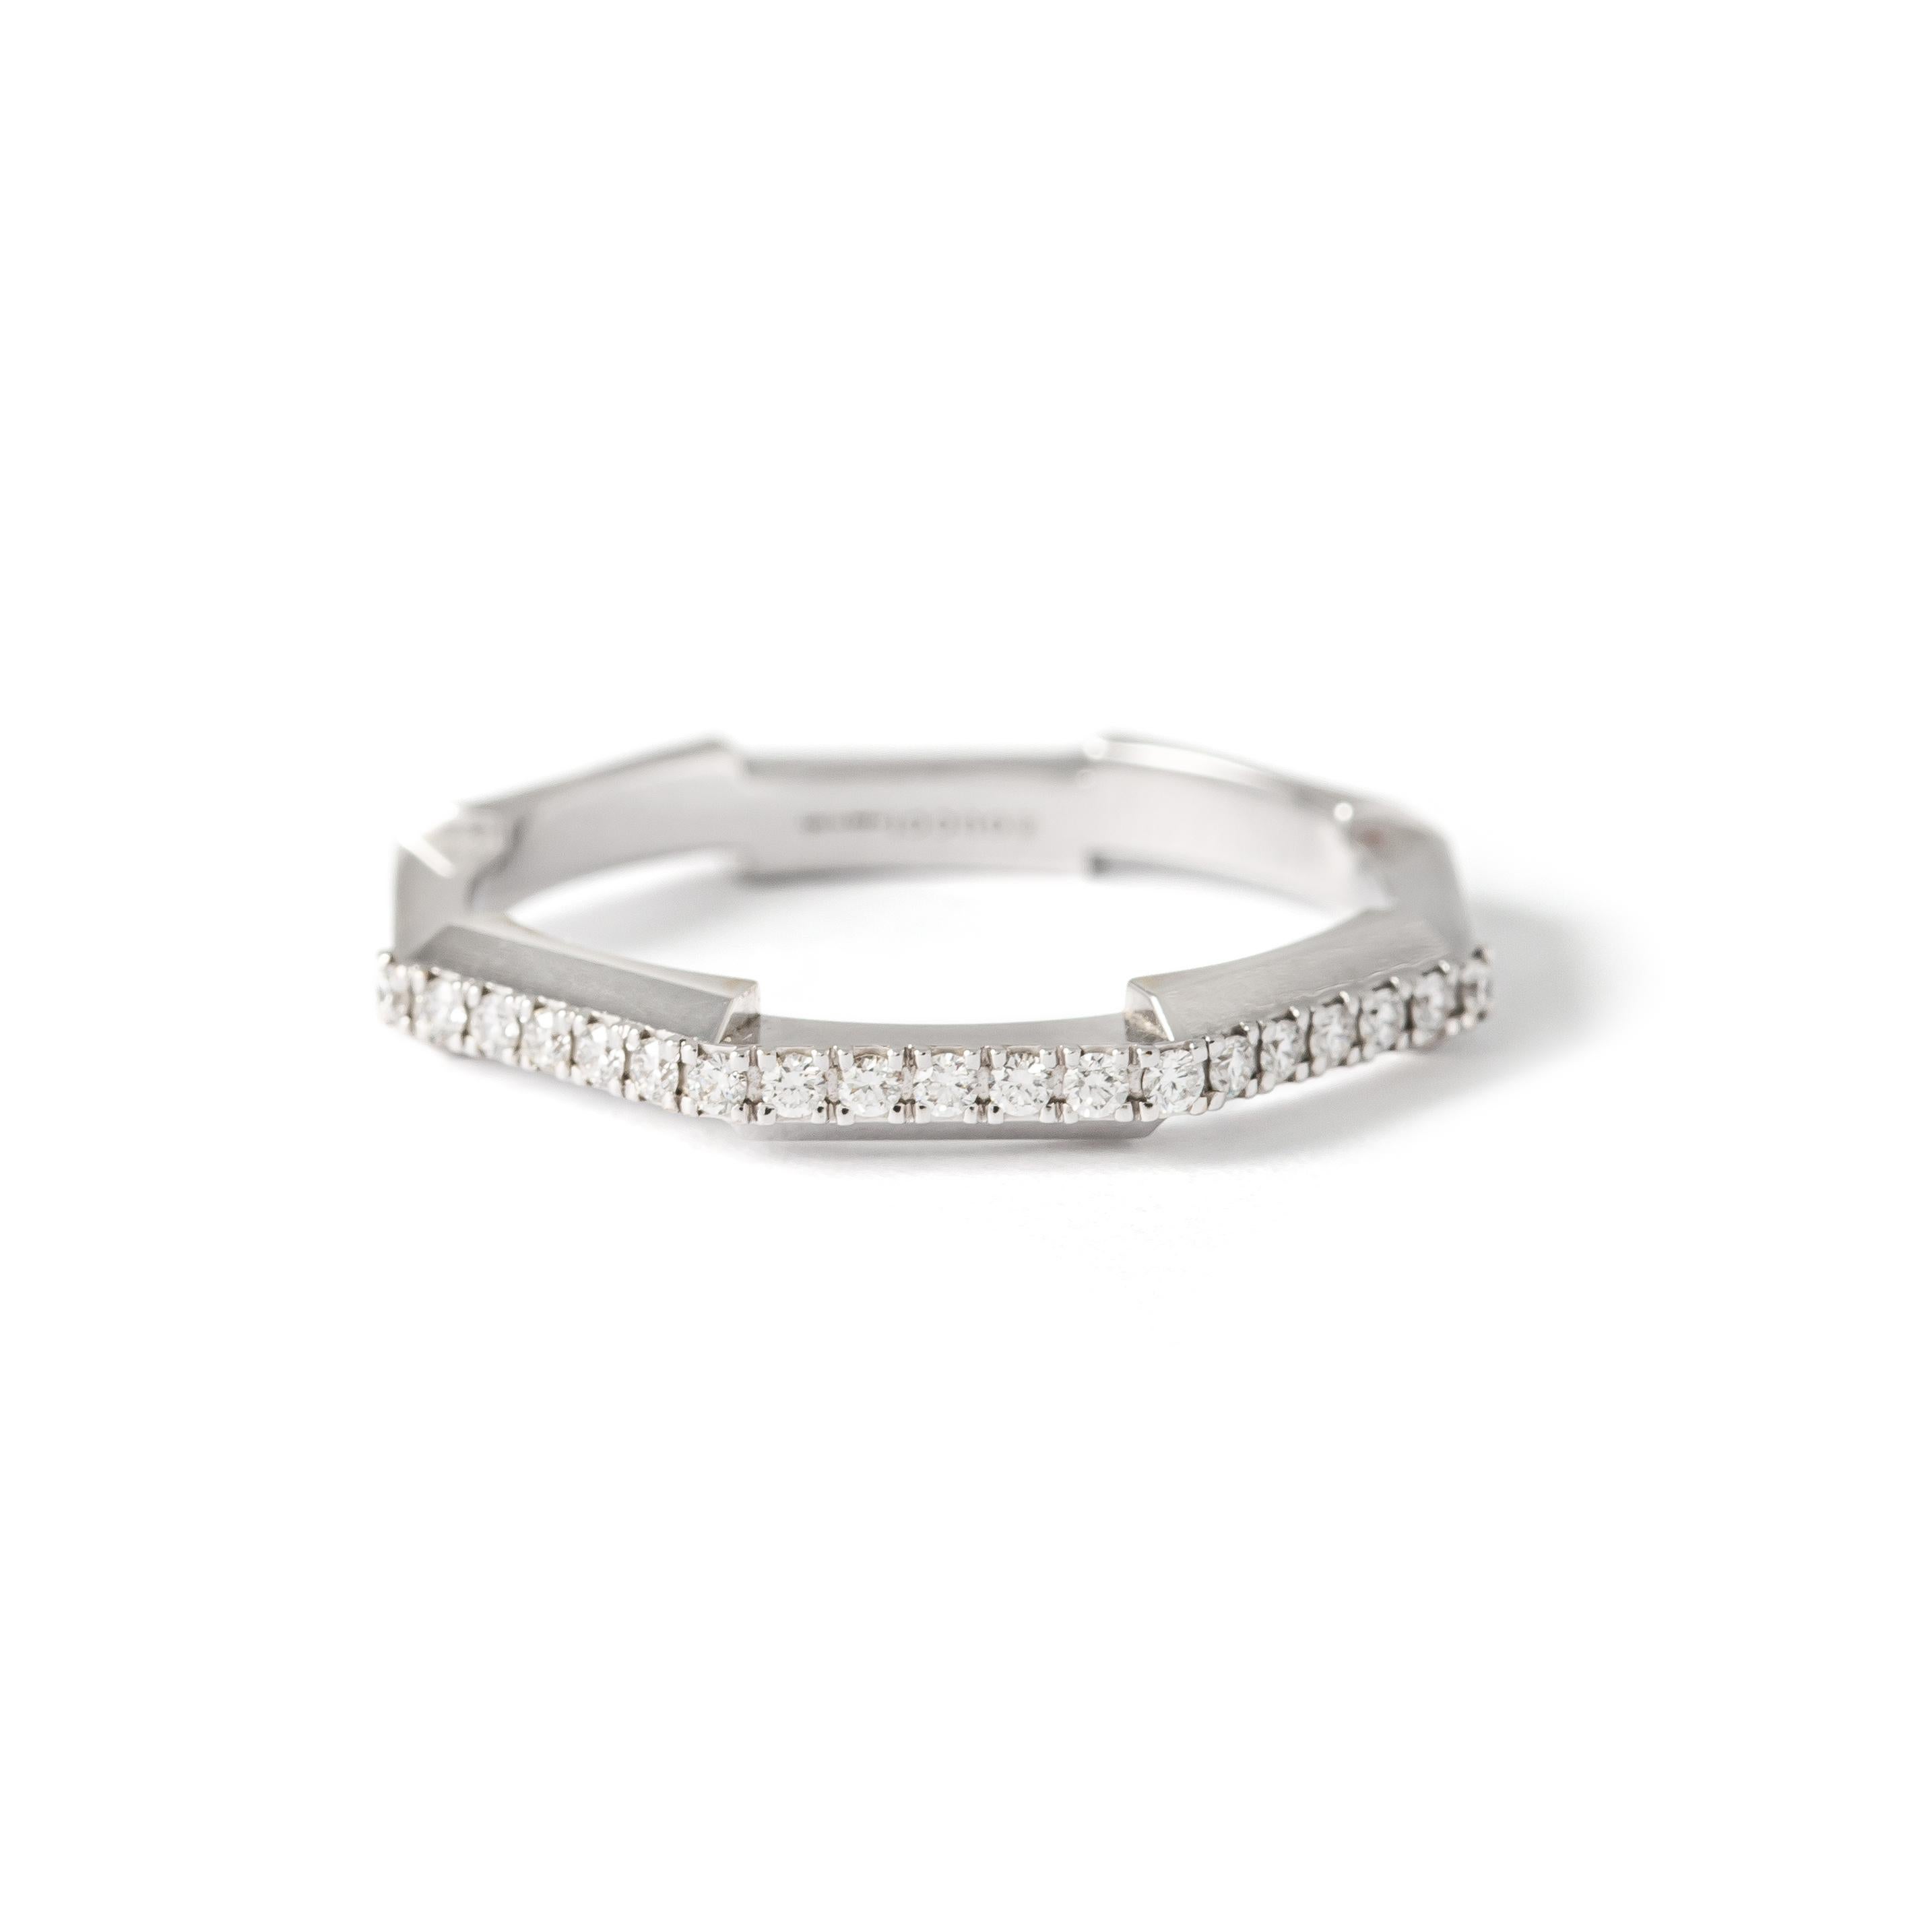 Gucci Link to Love Mirrored Ring 
18K White Gold and Diamond.

Size 18.

Comes with Gucci box.

Signed Gucci.
Made in ITALY.

A bold and influential ring design.
Stackable mechanism for adding one or more rings on top.

The Link To Love mirrored